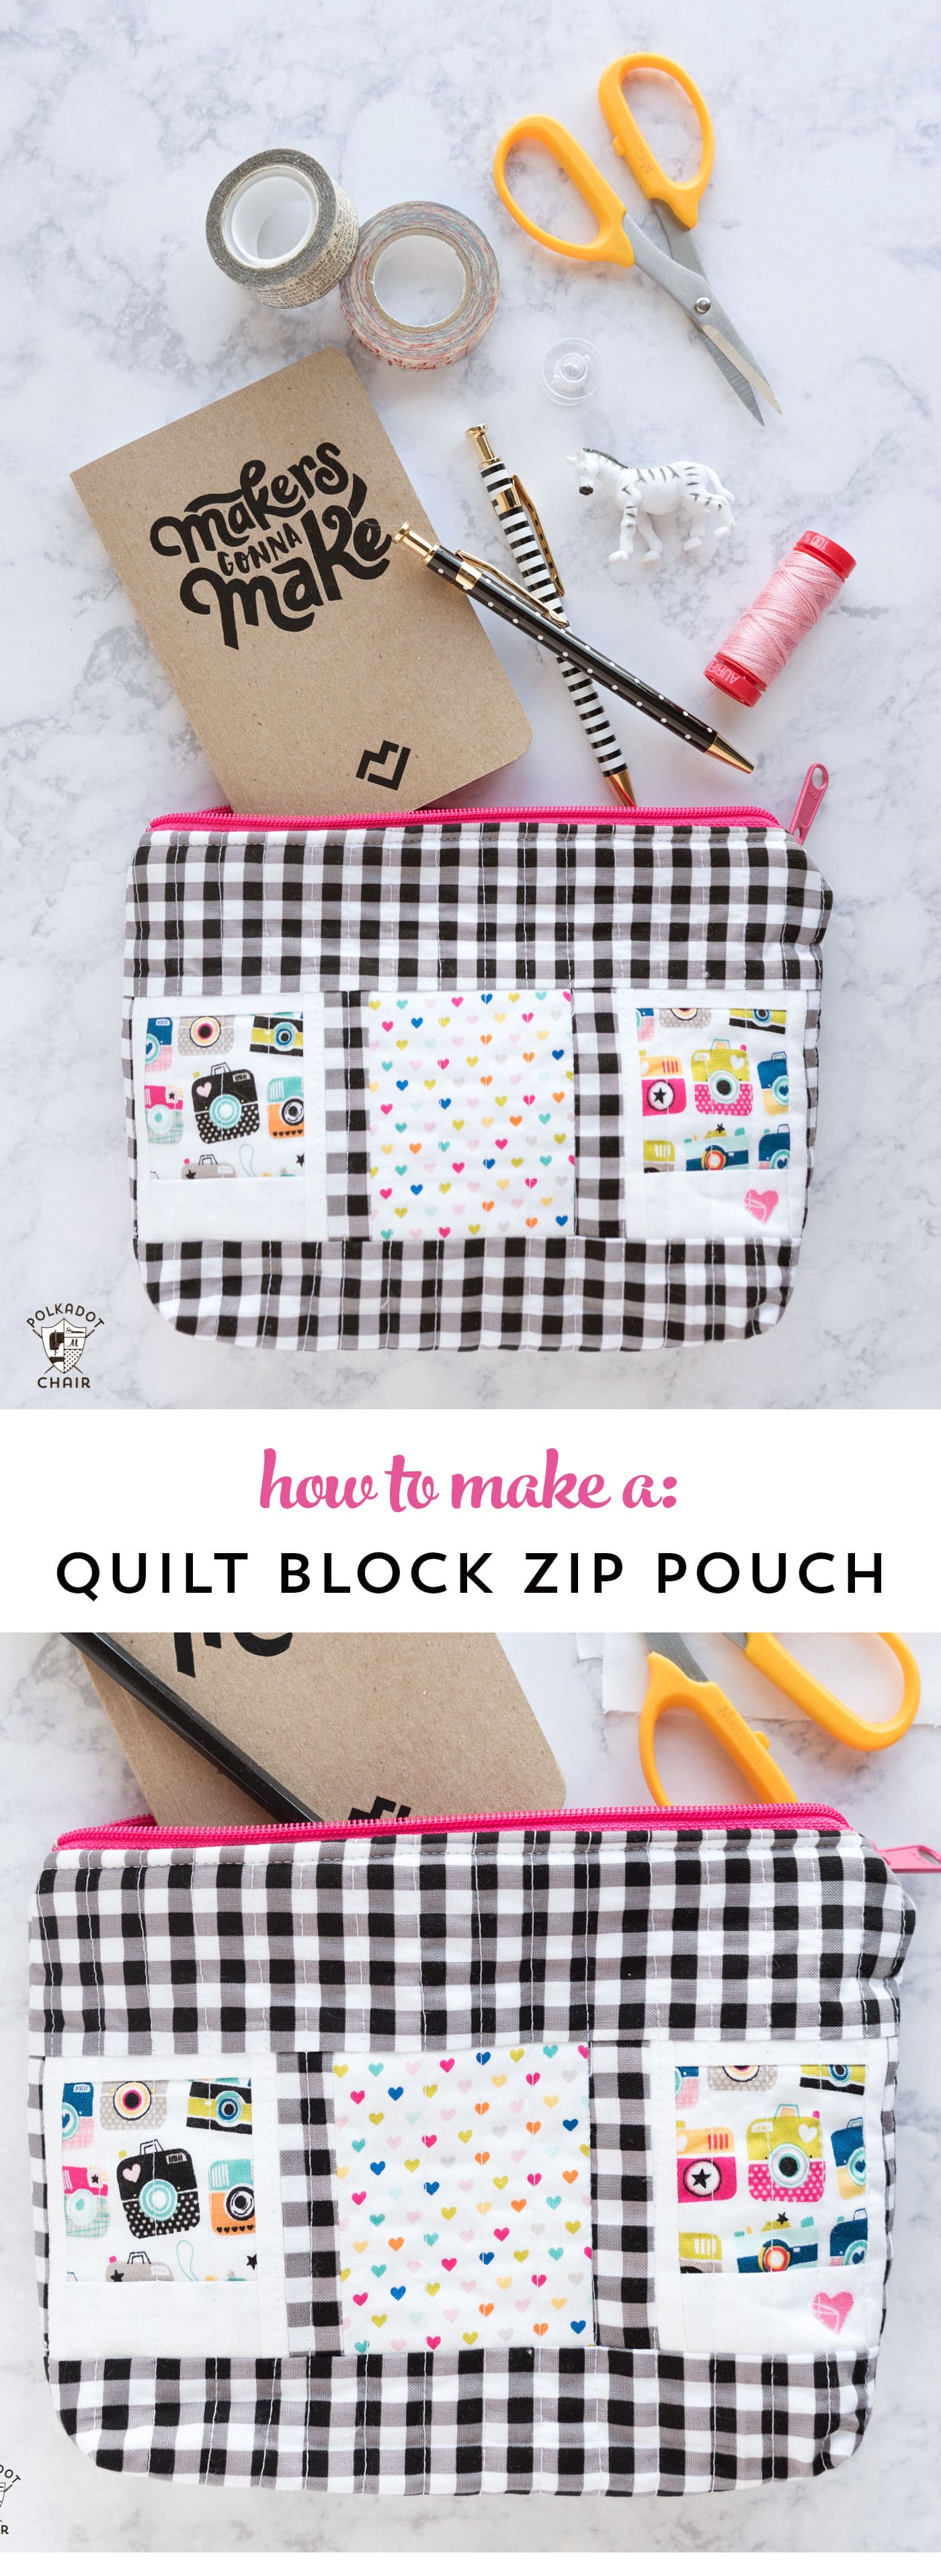 Free tutorial for a polaroid quilt block zip pouch - such a cute way to store your sewing or quilting supplies!